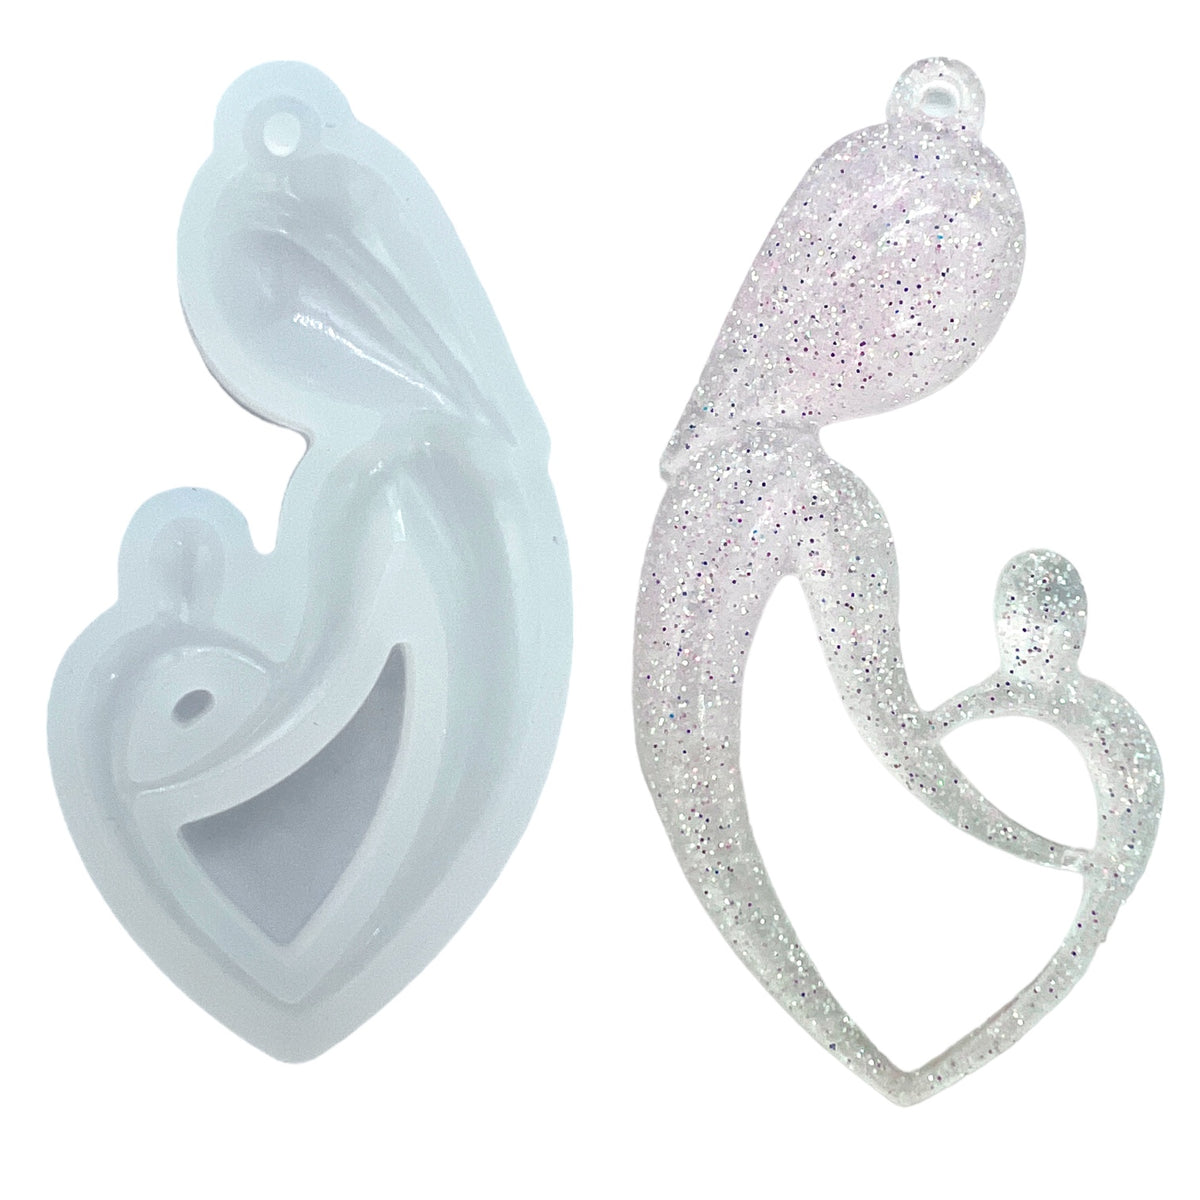 Mother&#39;s Embrace Heart Keychain or Ornament Mold for Epoxy or UV Resin